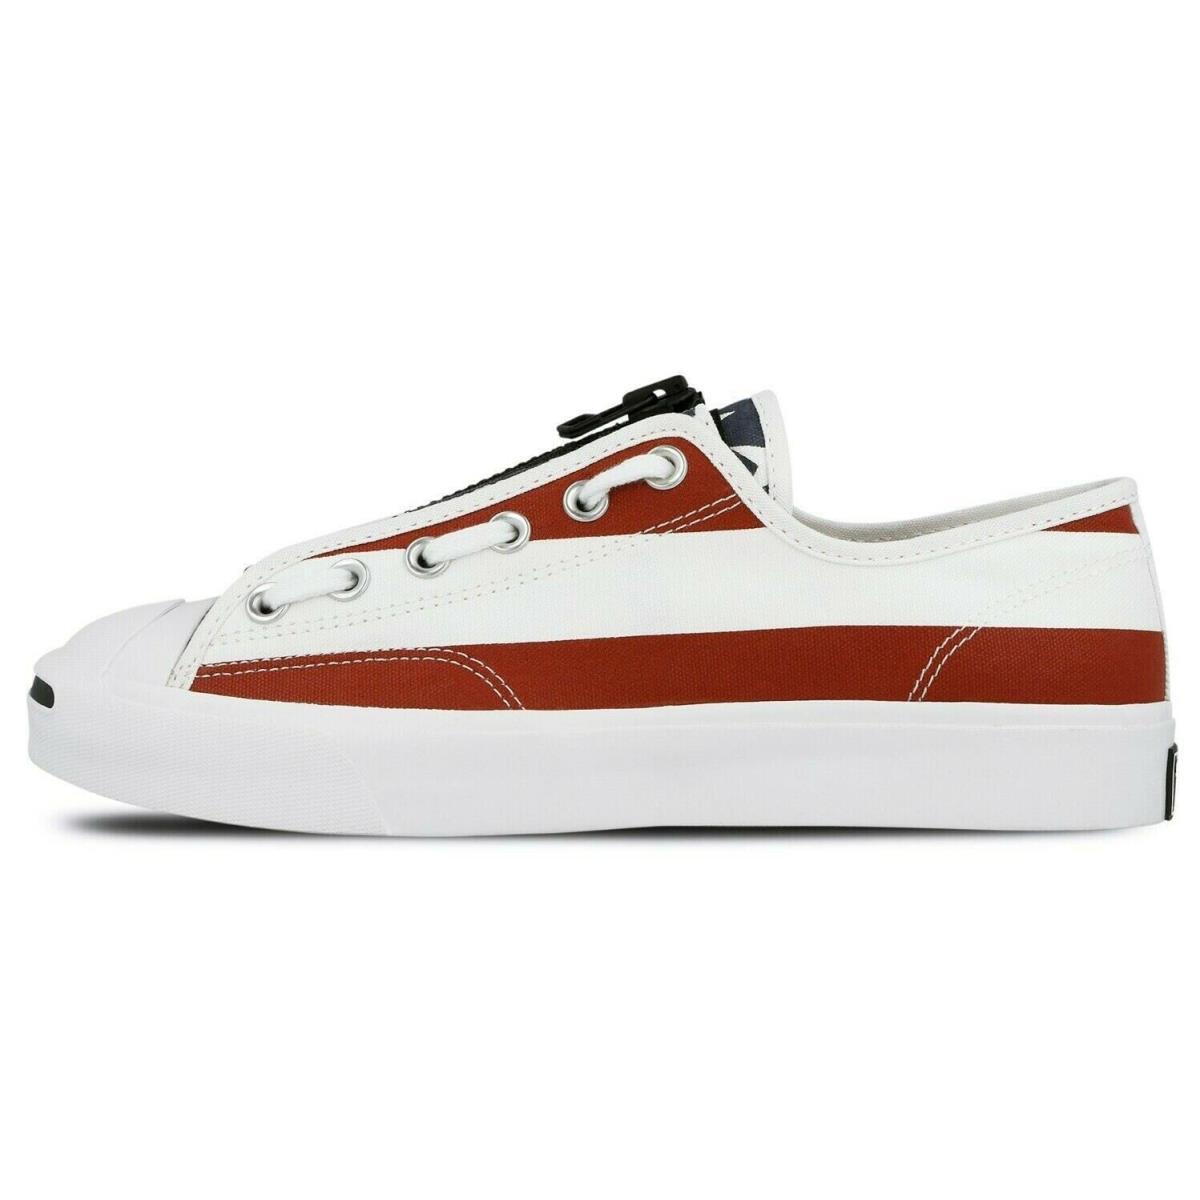 Takahiro The Soloist x Converse Jack Purcell Zip 164836C Usa Flag Red Stripe OG - White